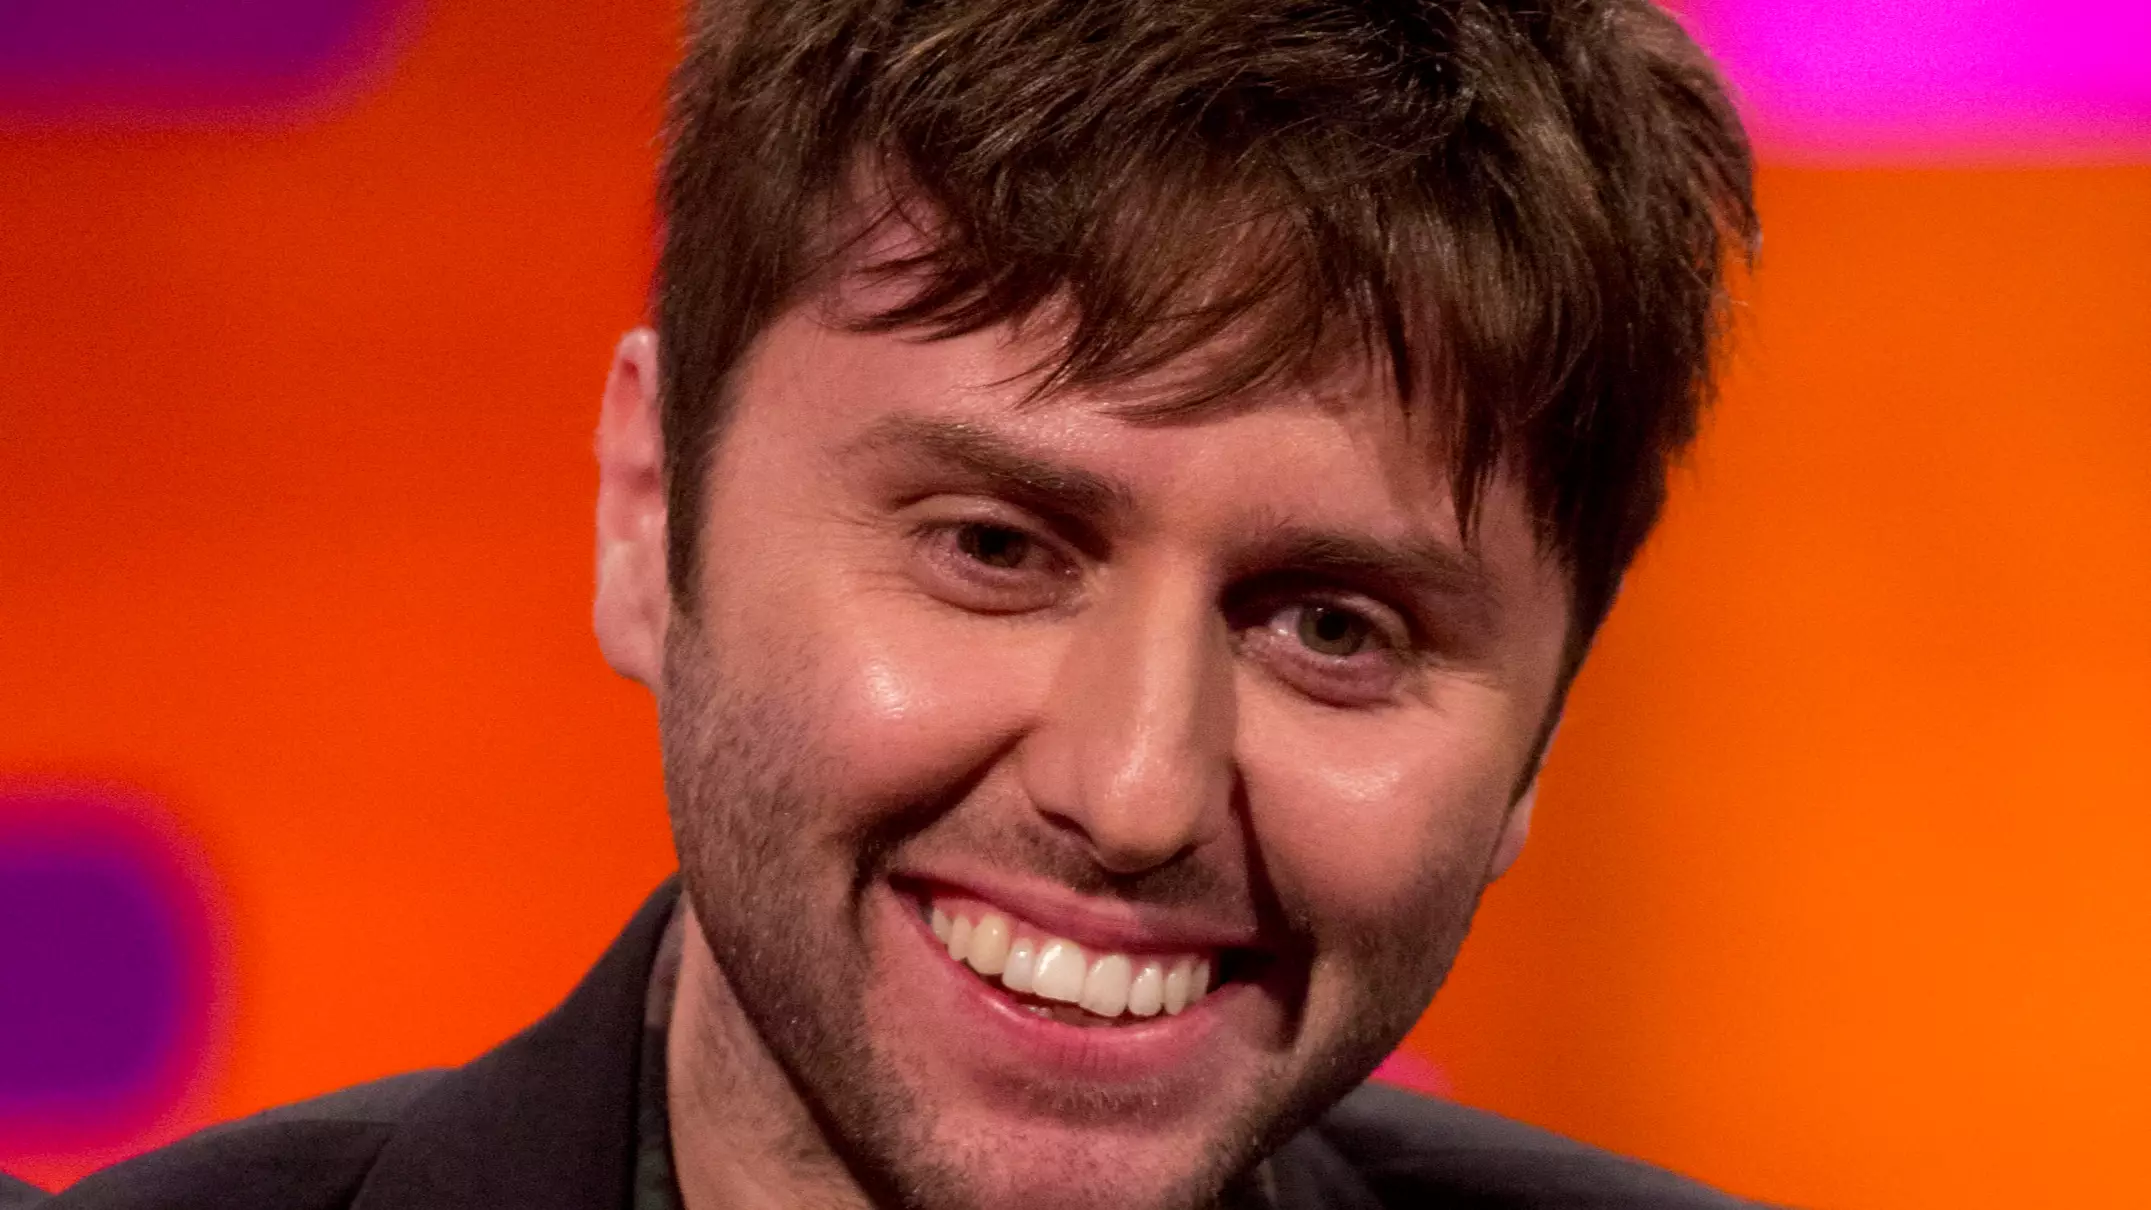 Inbetweeners Star James Buckley Could Have Made Over £300,000 Selling Video Clips To Fans